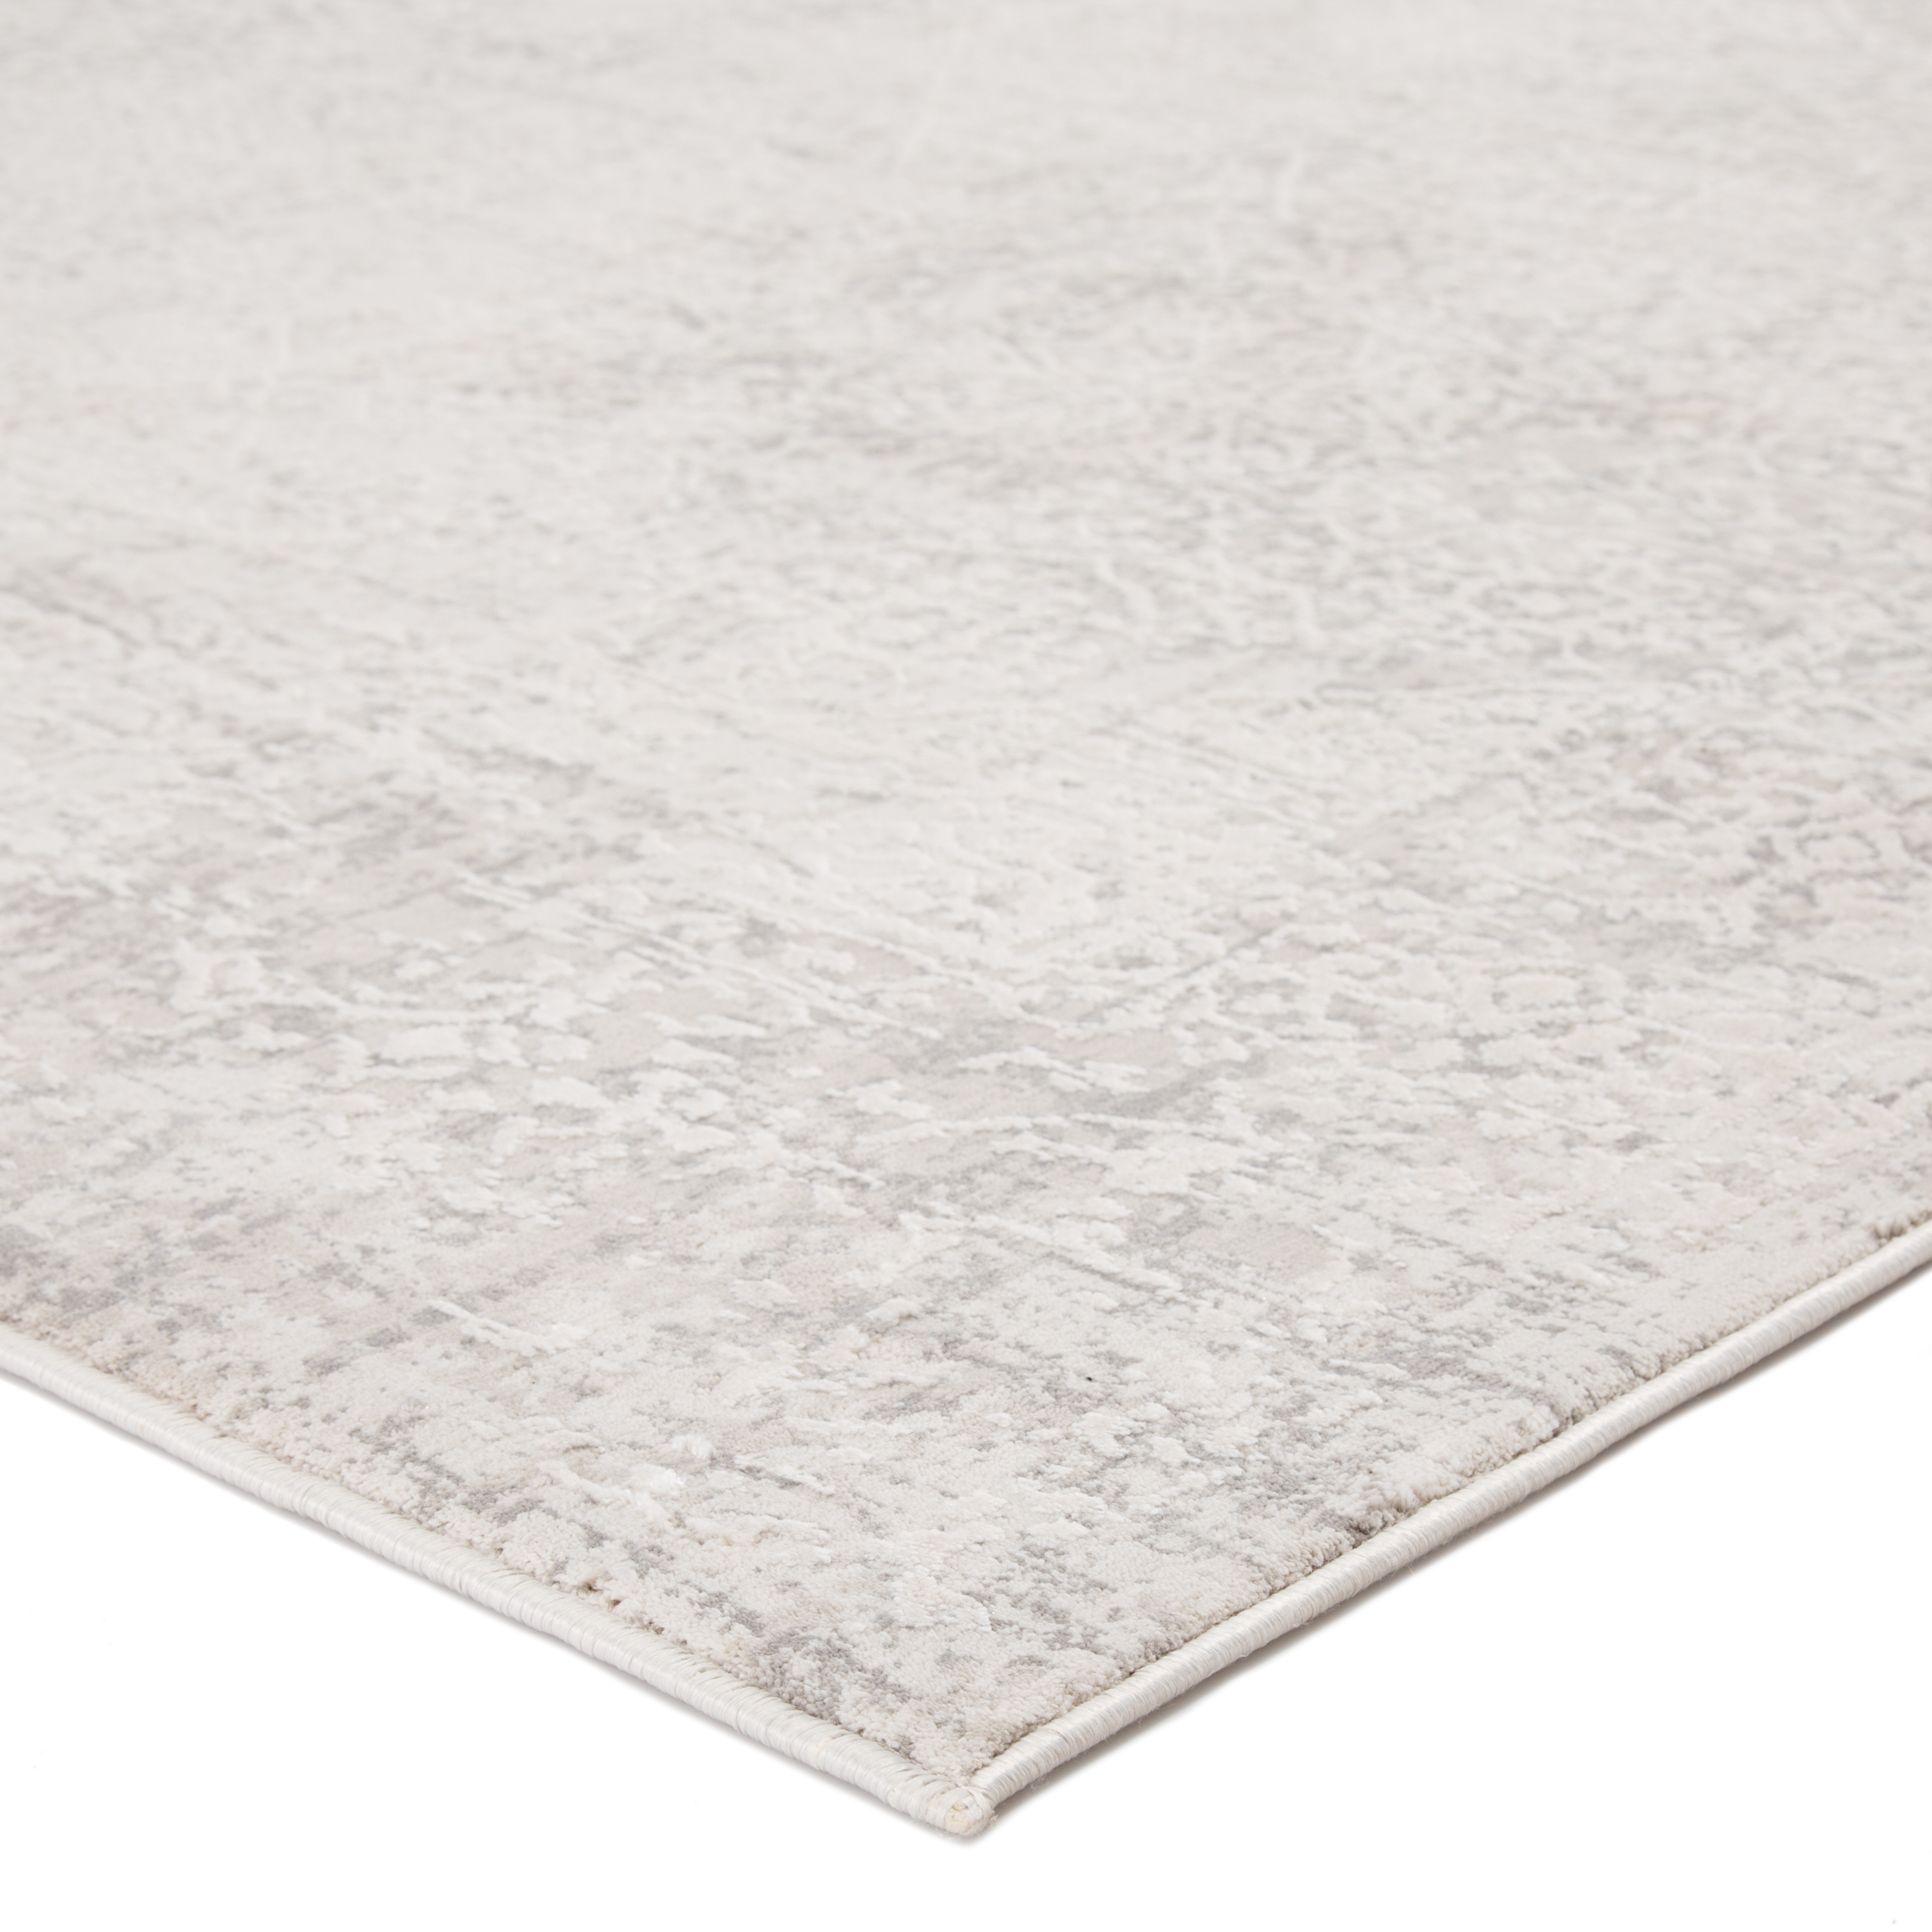 Lianna Abstract Silver/ White Area Rug (4'X6') - Image 1